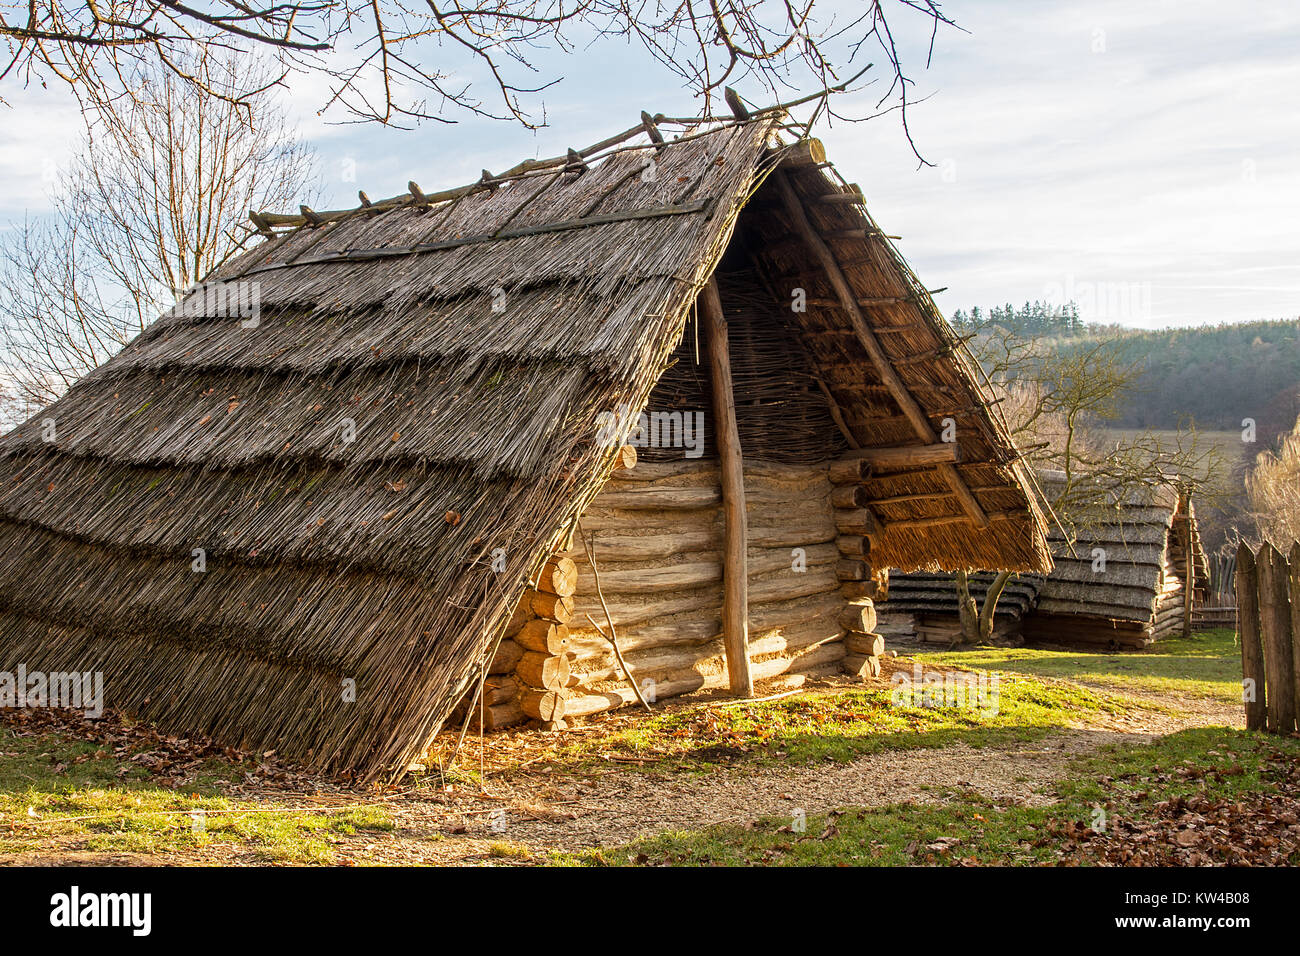 Old rural hut with a thatched roof made of straw Stock Photo